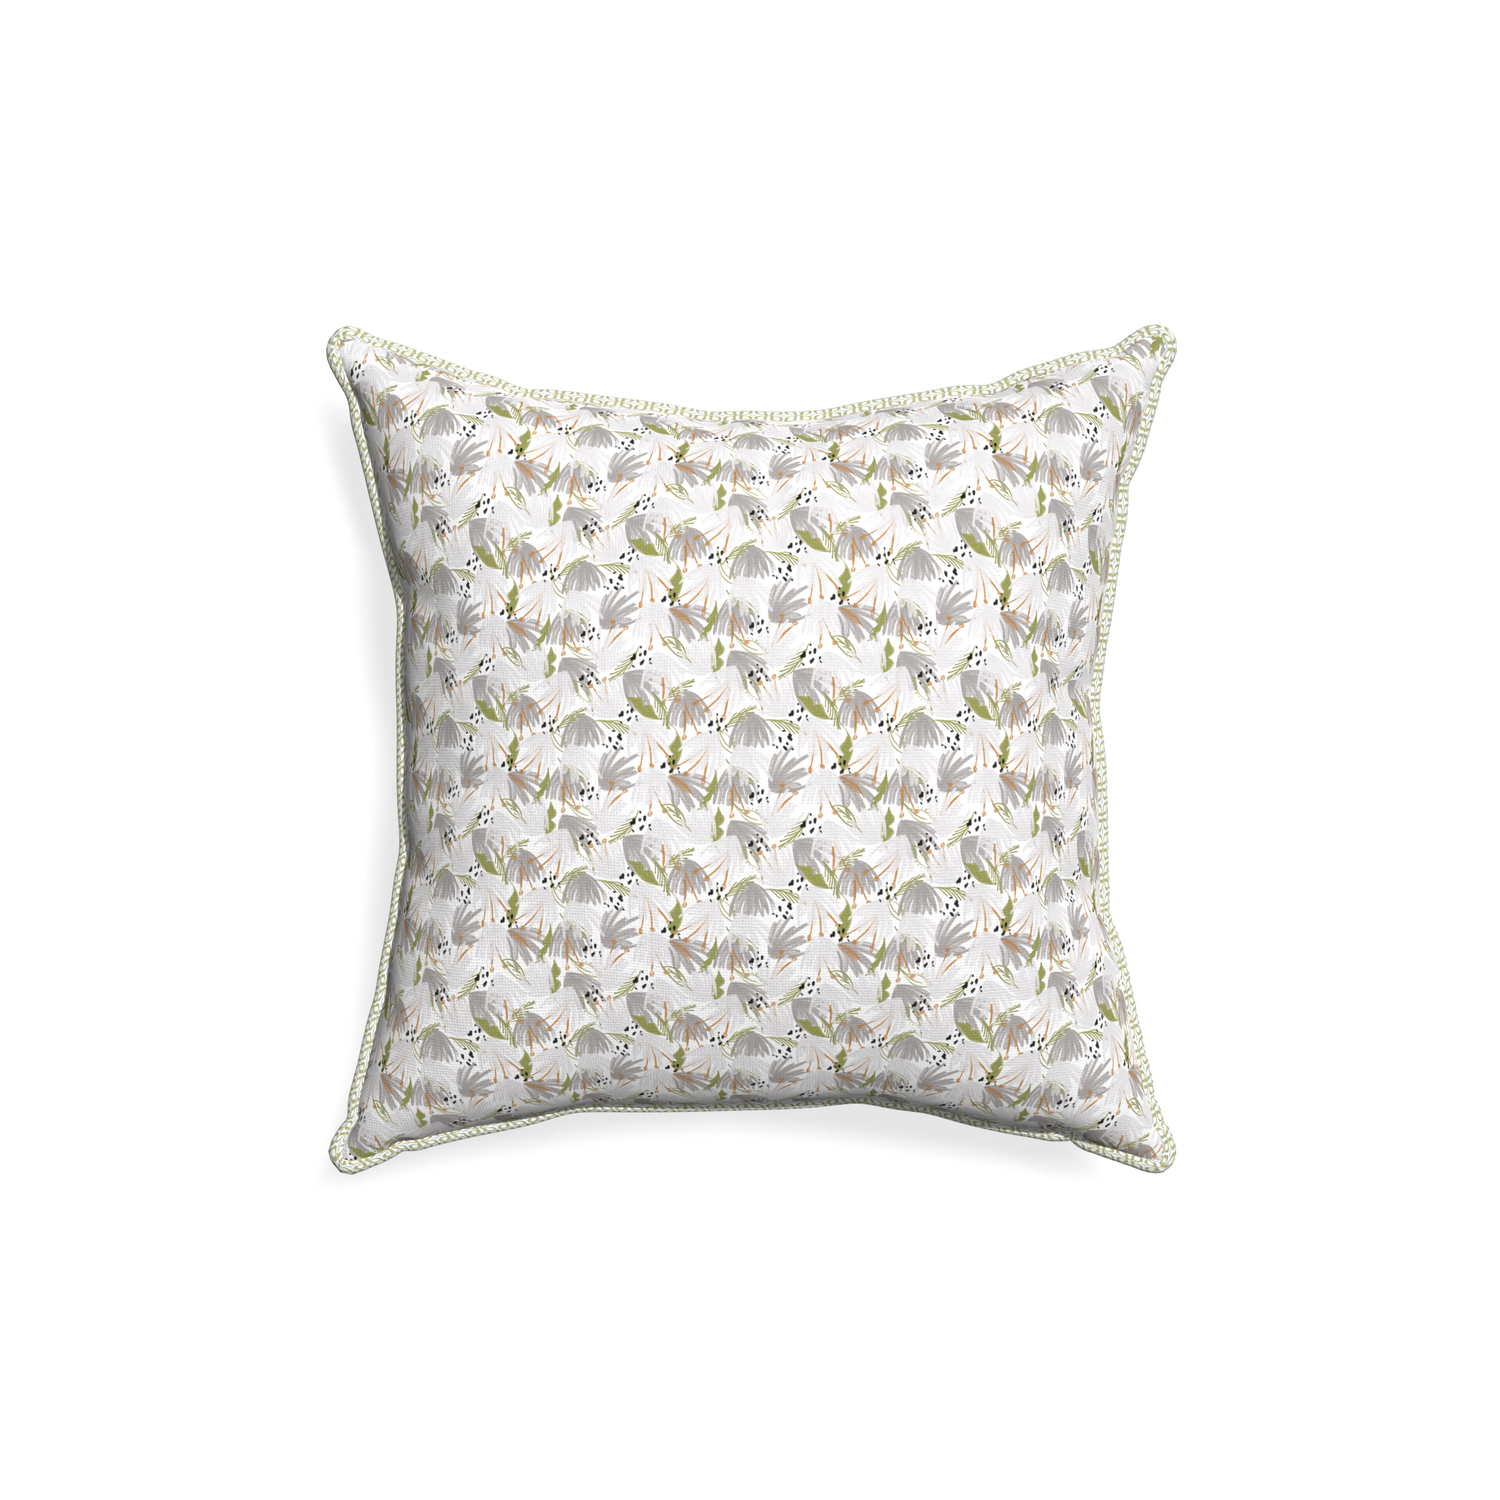 18-square eden grey custom pillow with l piping on white background